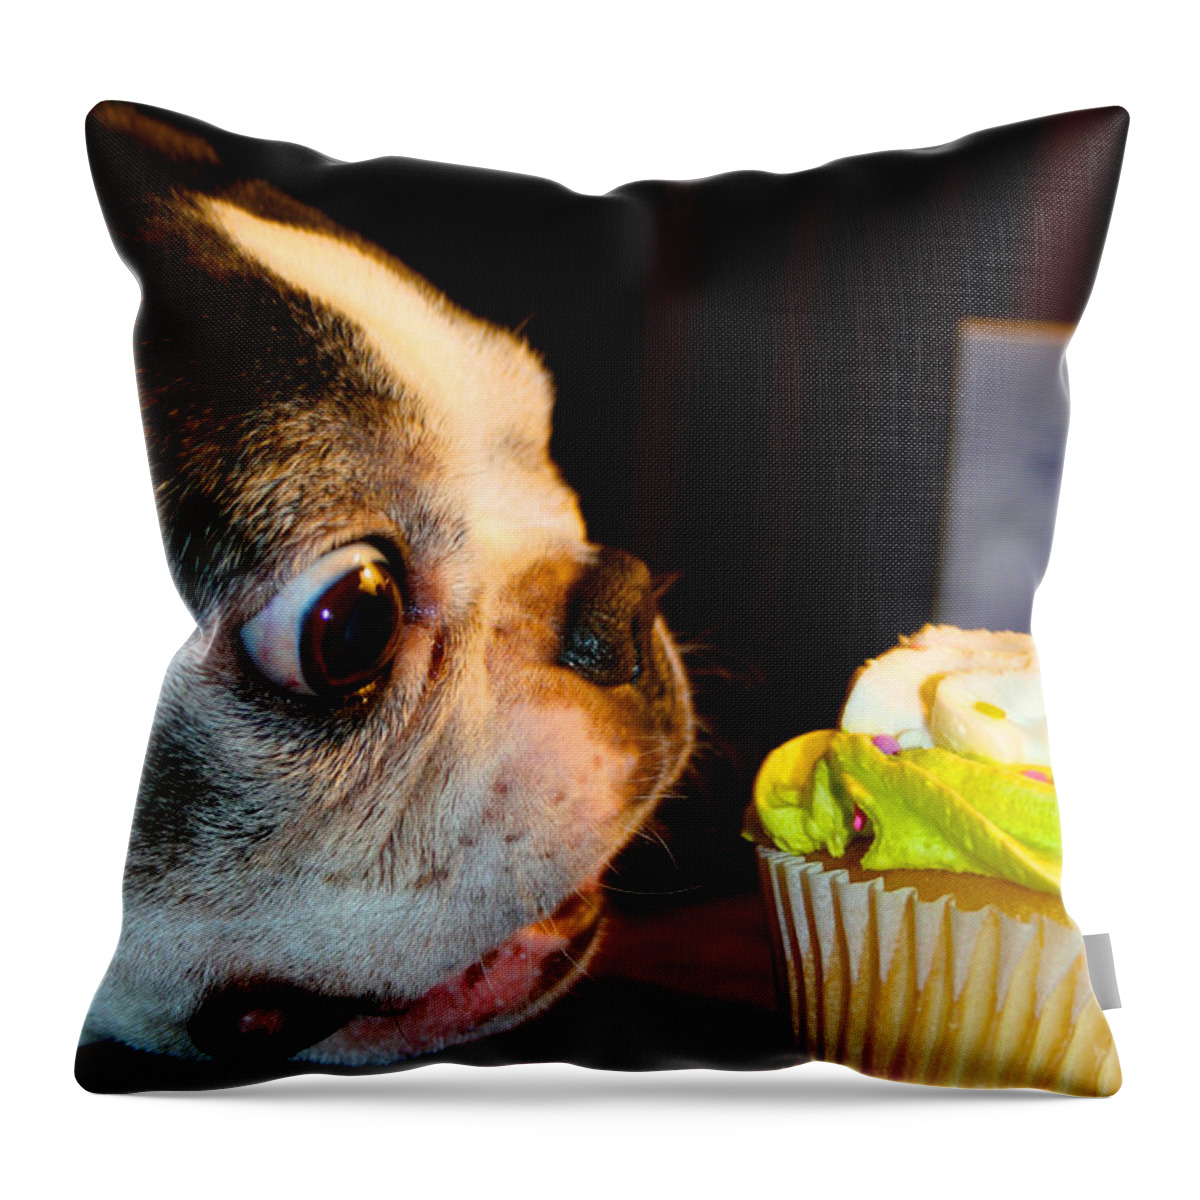 Boston Terrier Throw Pillow featuring the photograph Birthday Binge by Susan Herber